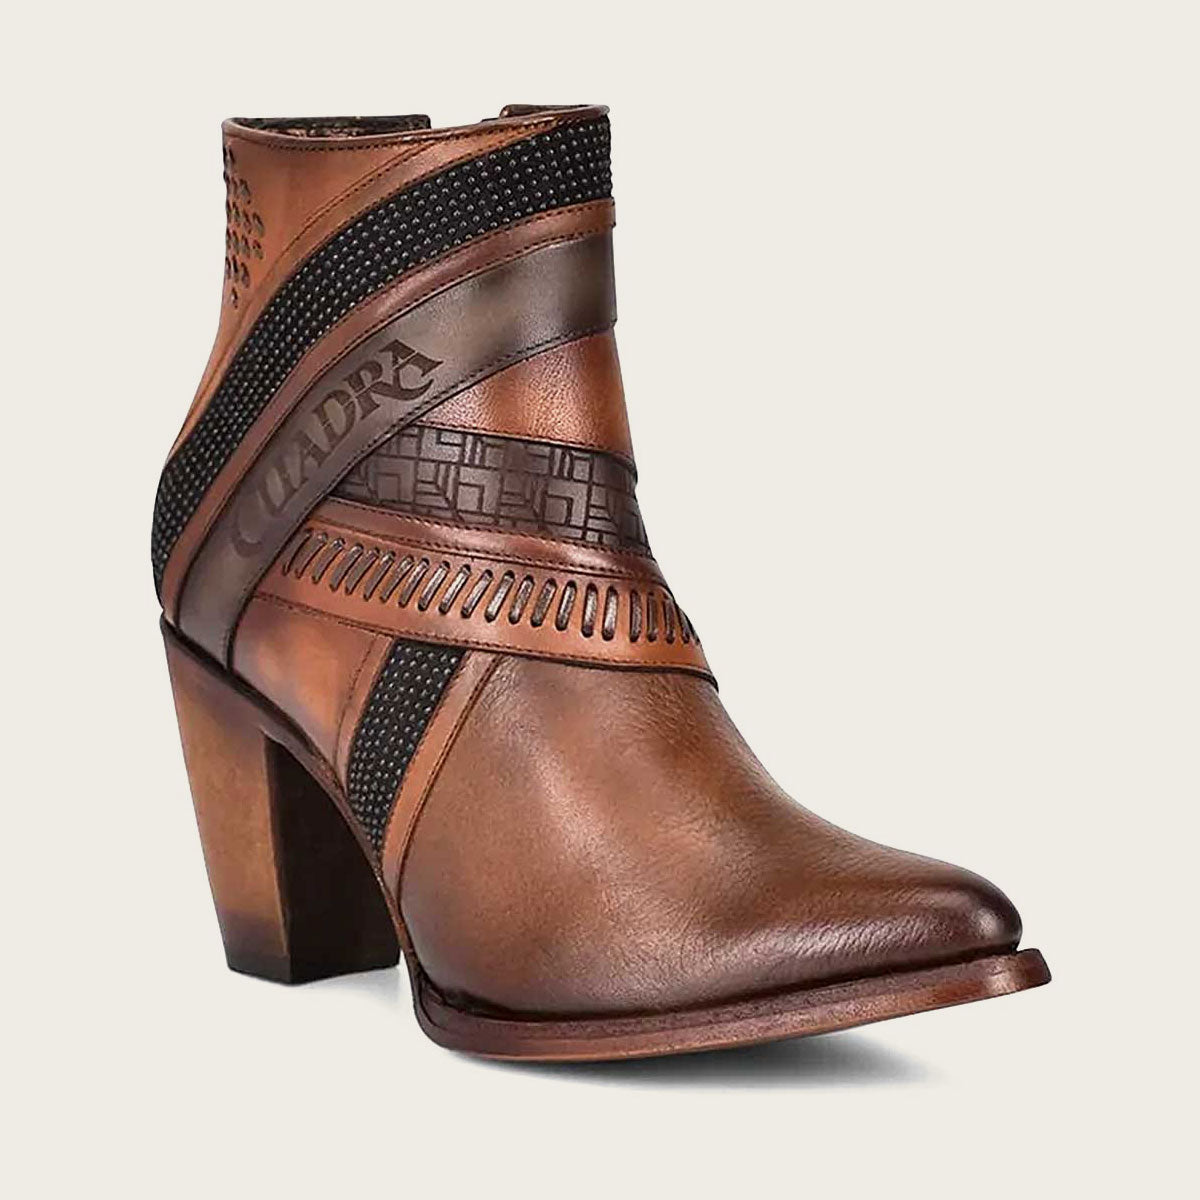 Brown hand-painted leather ankle bootie with decorative accents.